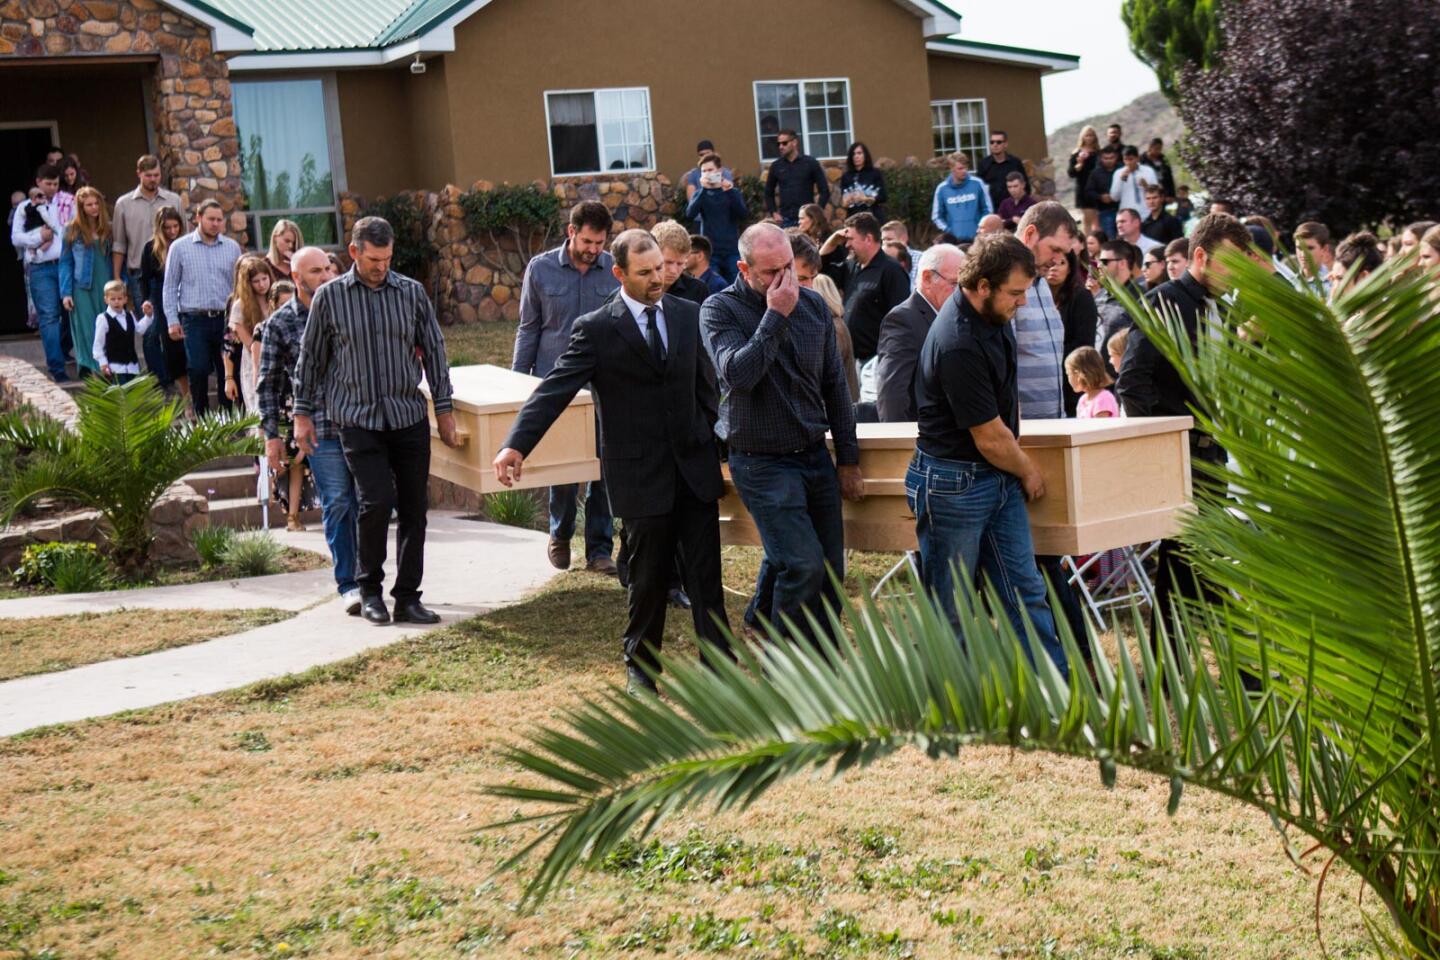 The coffins of Dawna Langford and two of her sons, Trevor and Rogan, are carried out for their funeral Thursday in La Mora, Mexico, Thursday, Nov. 7, 2019. The three were among the nine Mormons killed in Monday's attack.